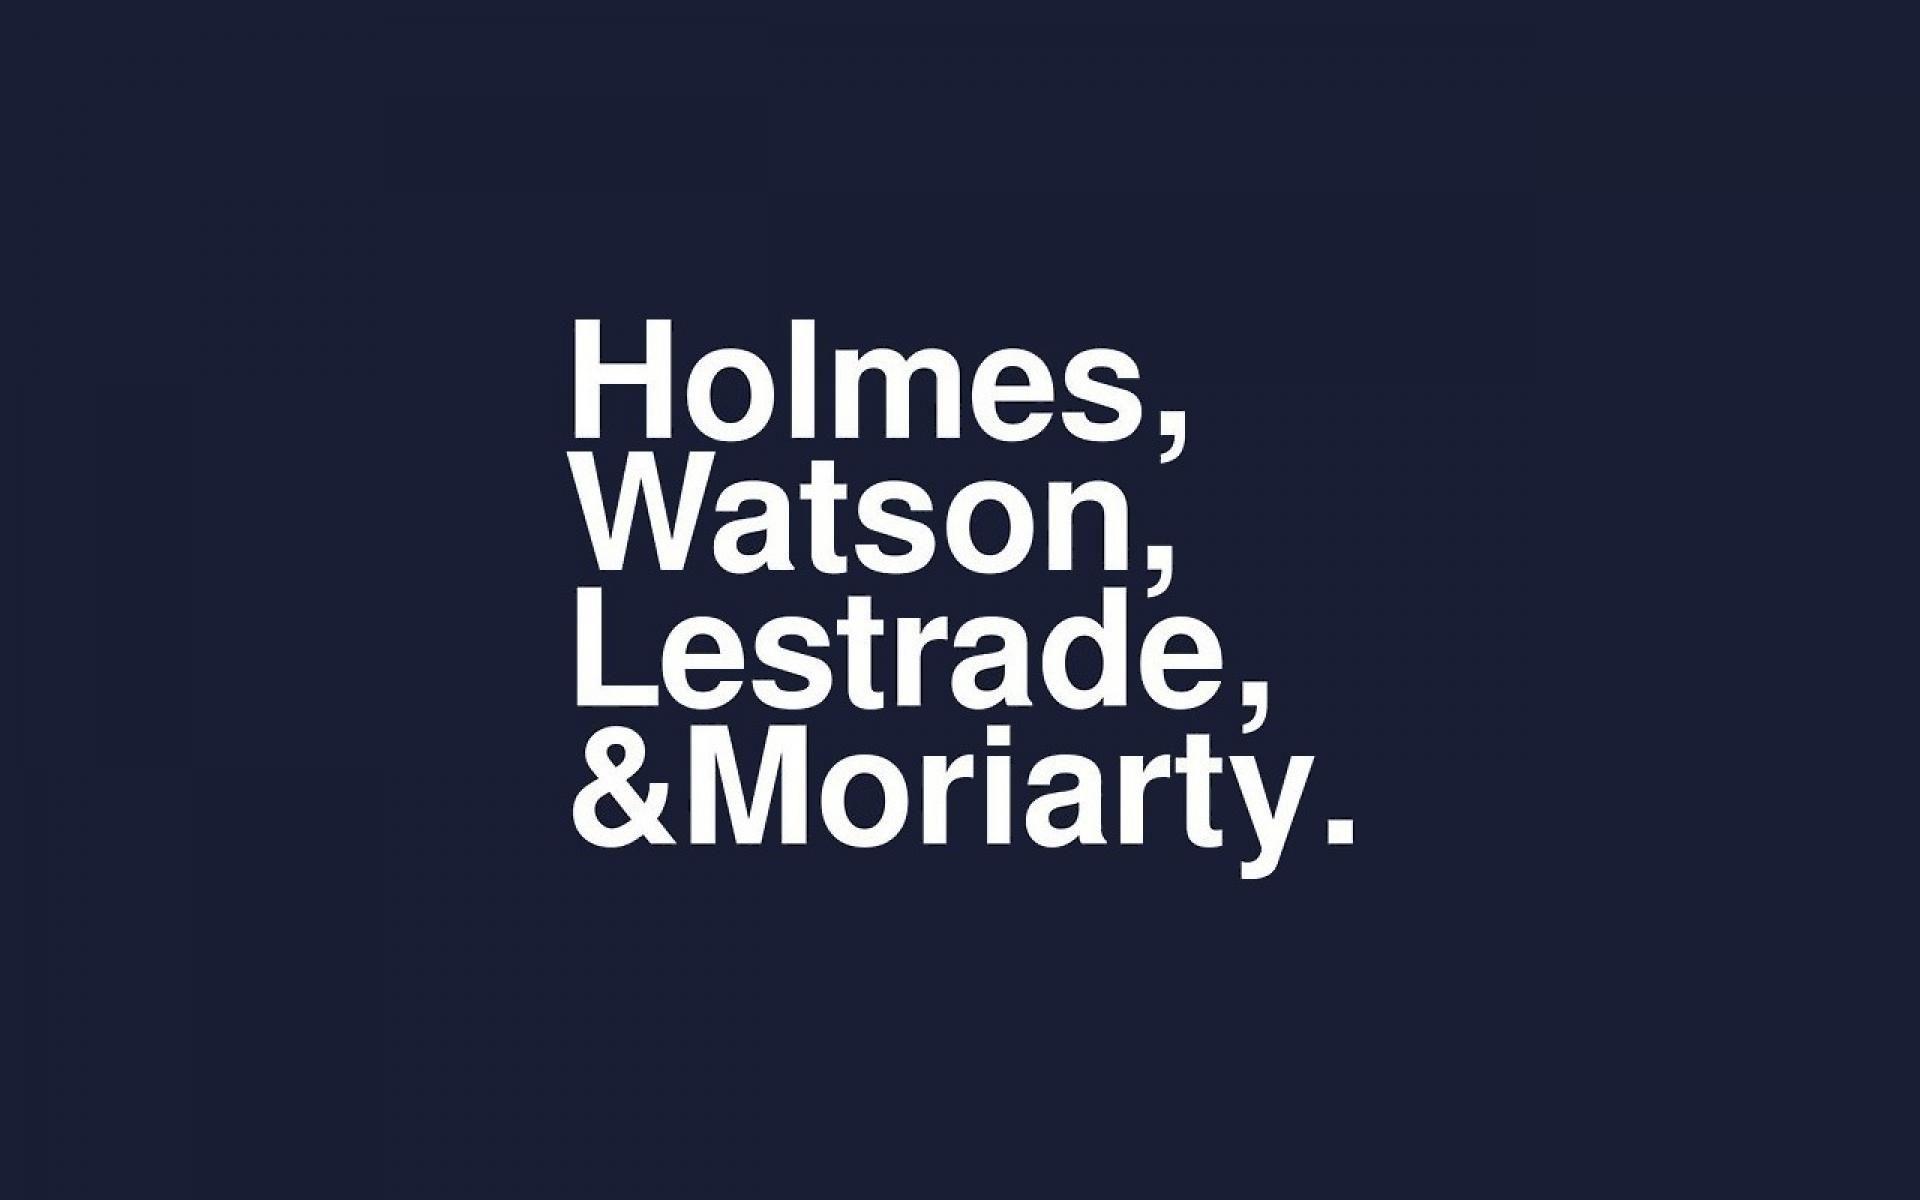 Sherlock Holmes Quotes Wallpapers - Wallpaper Cave